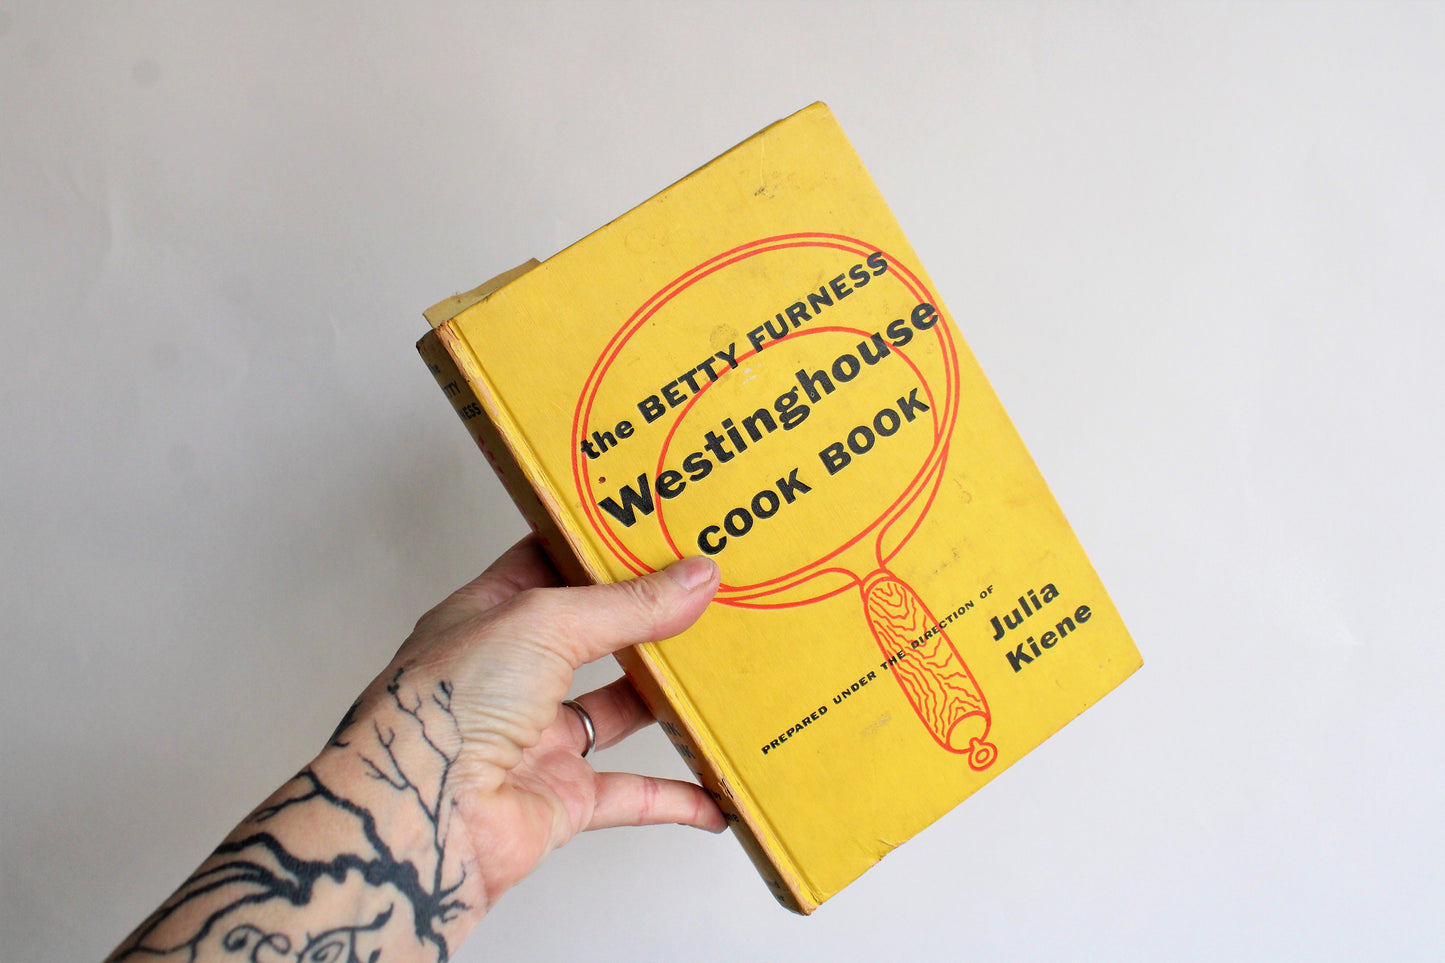 Vintage 1950s Westinghouse Cook Book by Betty Furness